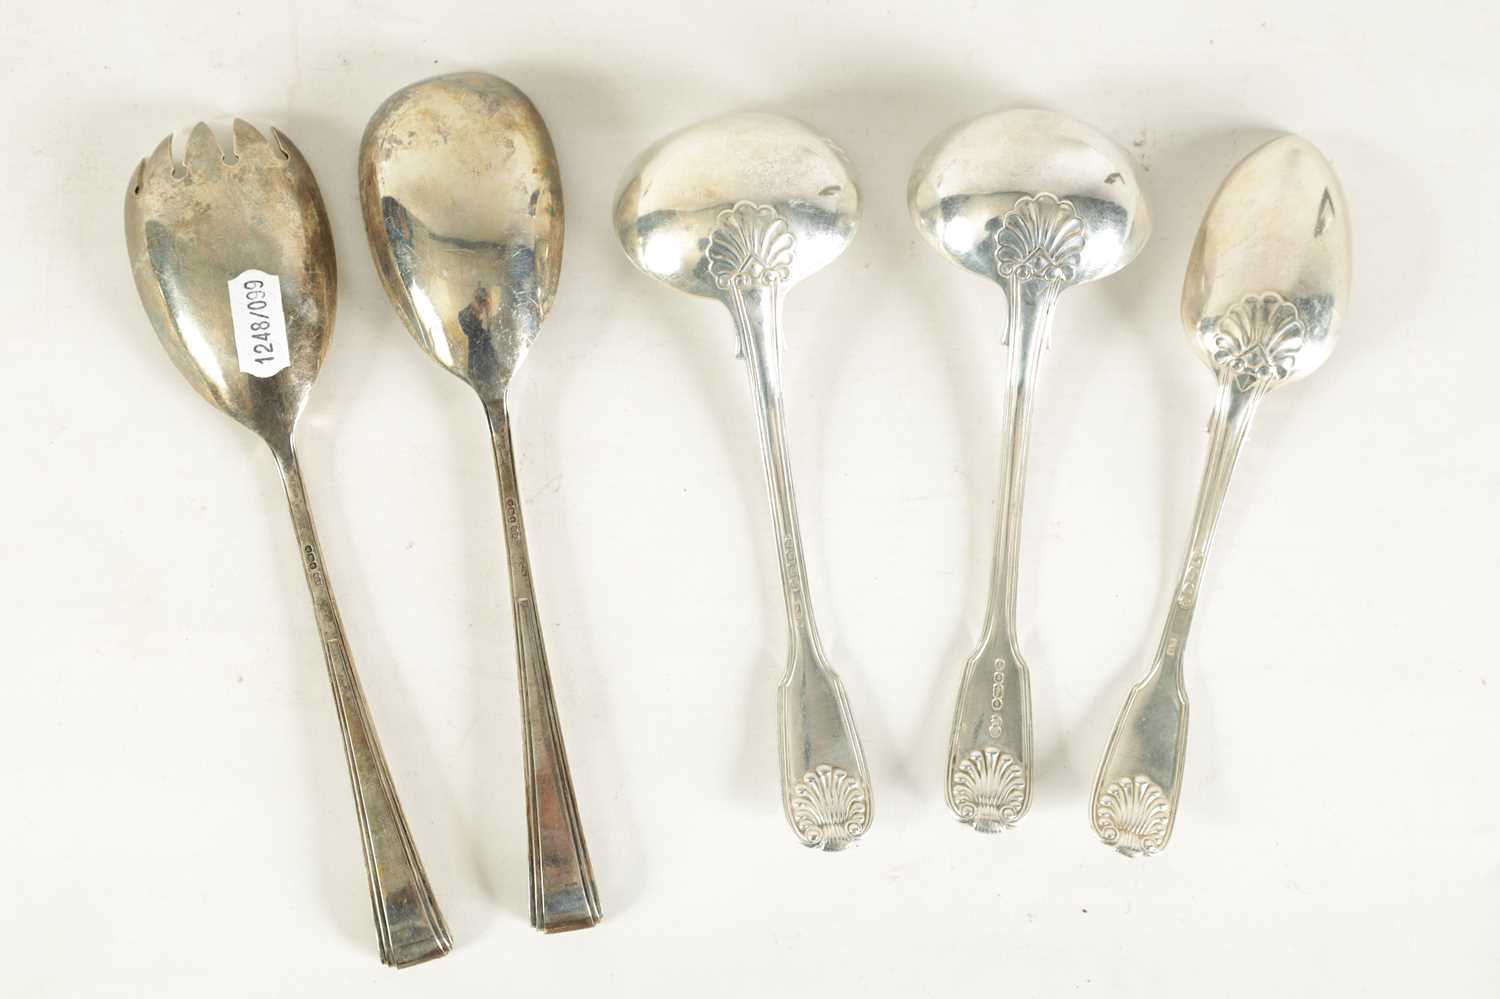 A PAIR OF VICTORIAN DOUBLE SHELL AND THREAD FIDDLE PATTERN SILVER SAUCE LADLES - Image 5 of 8